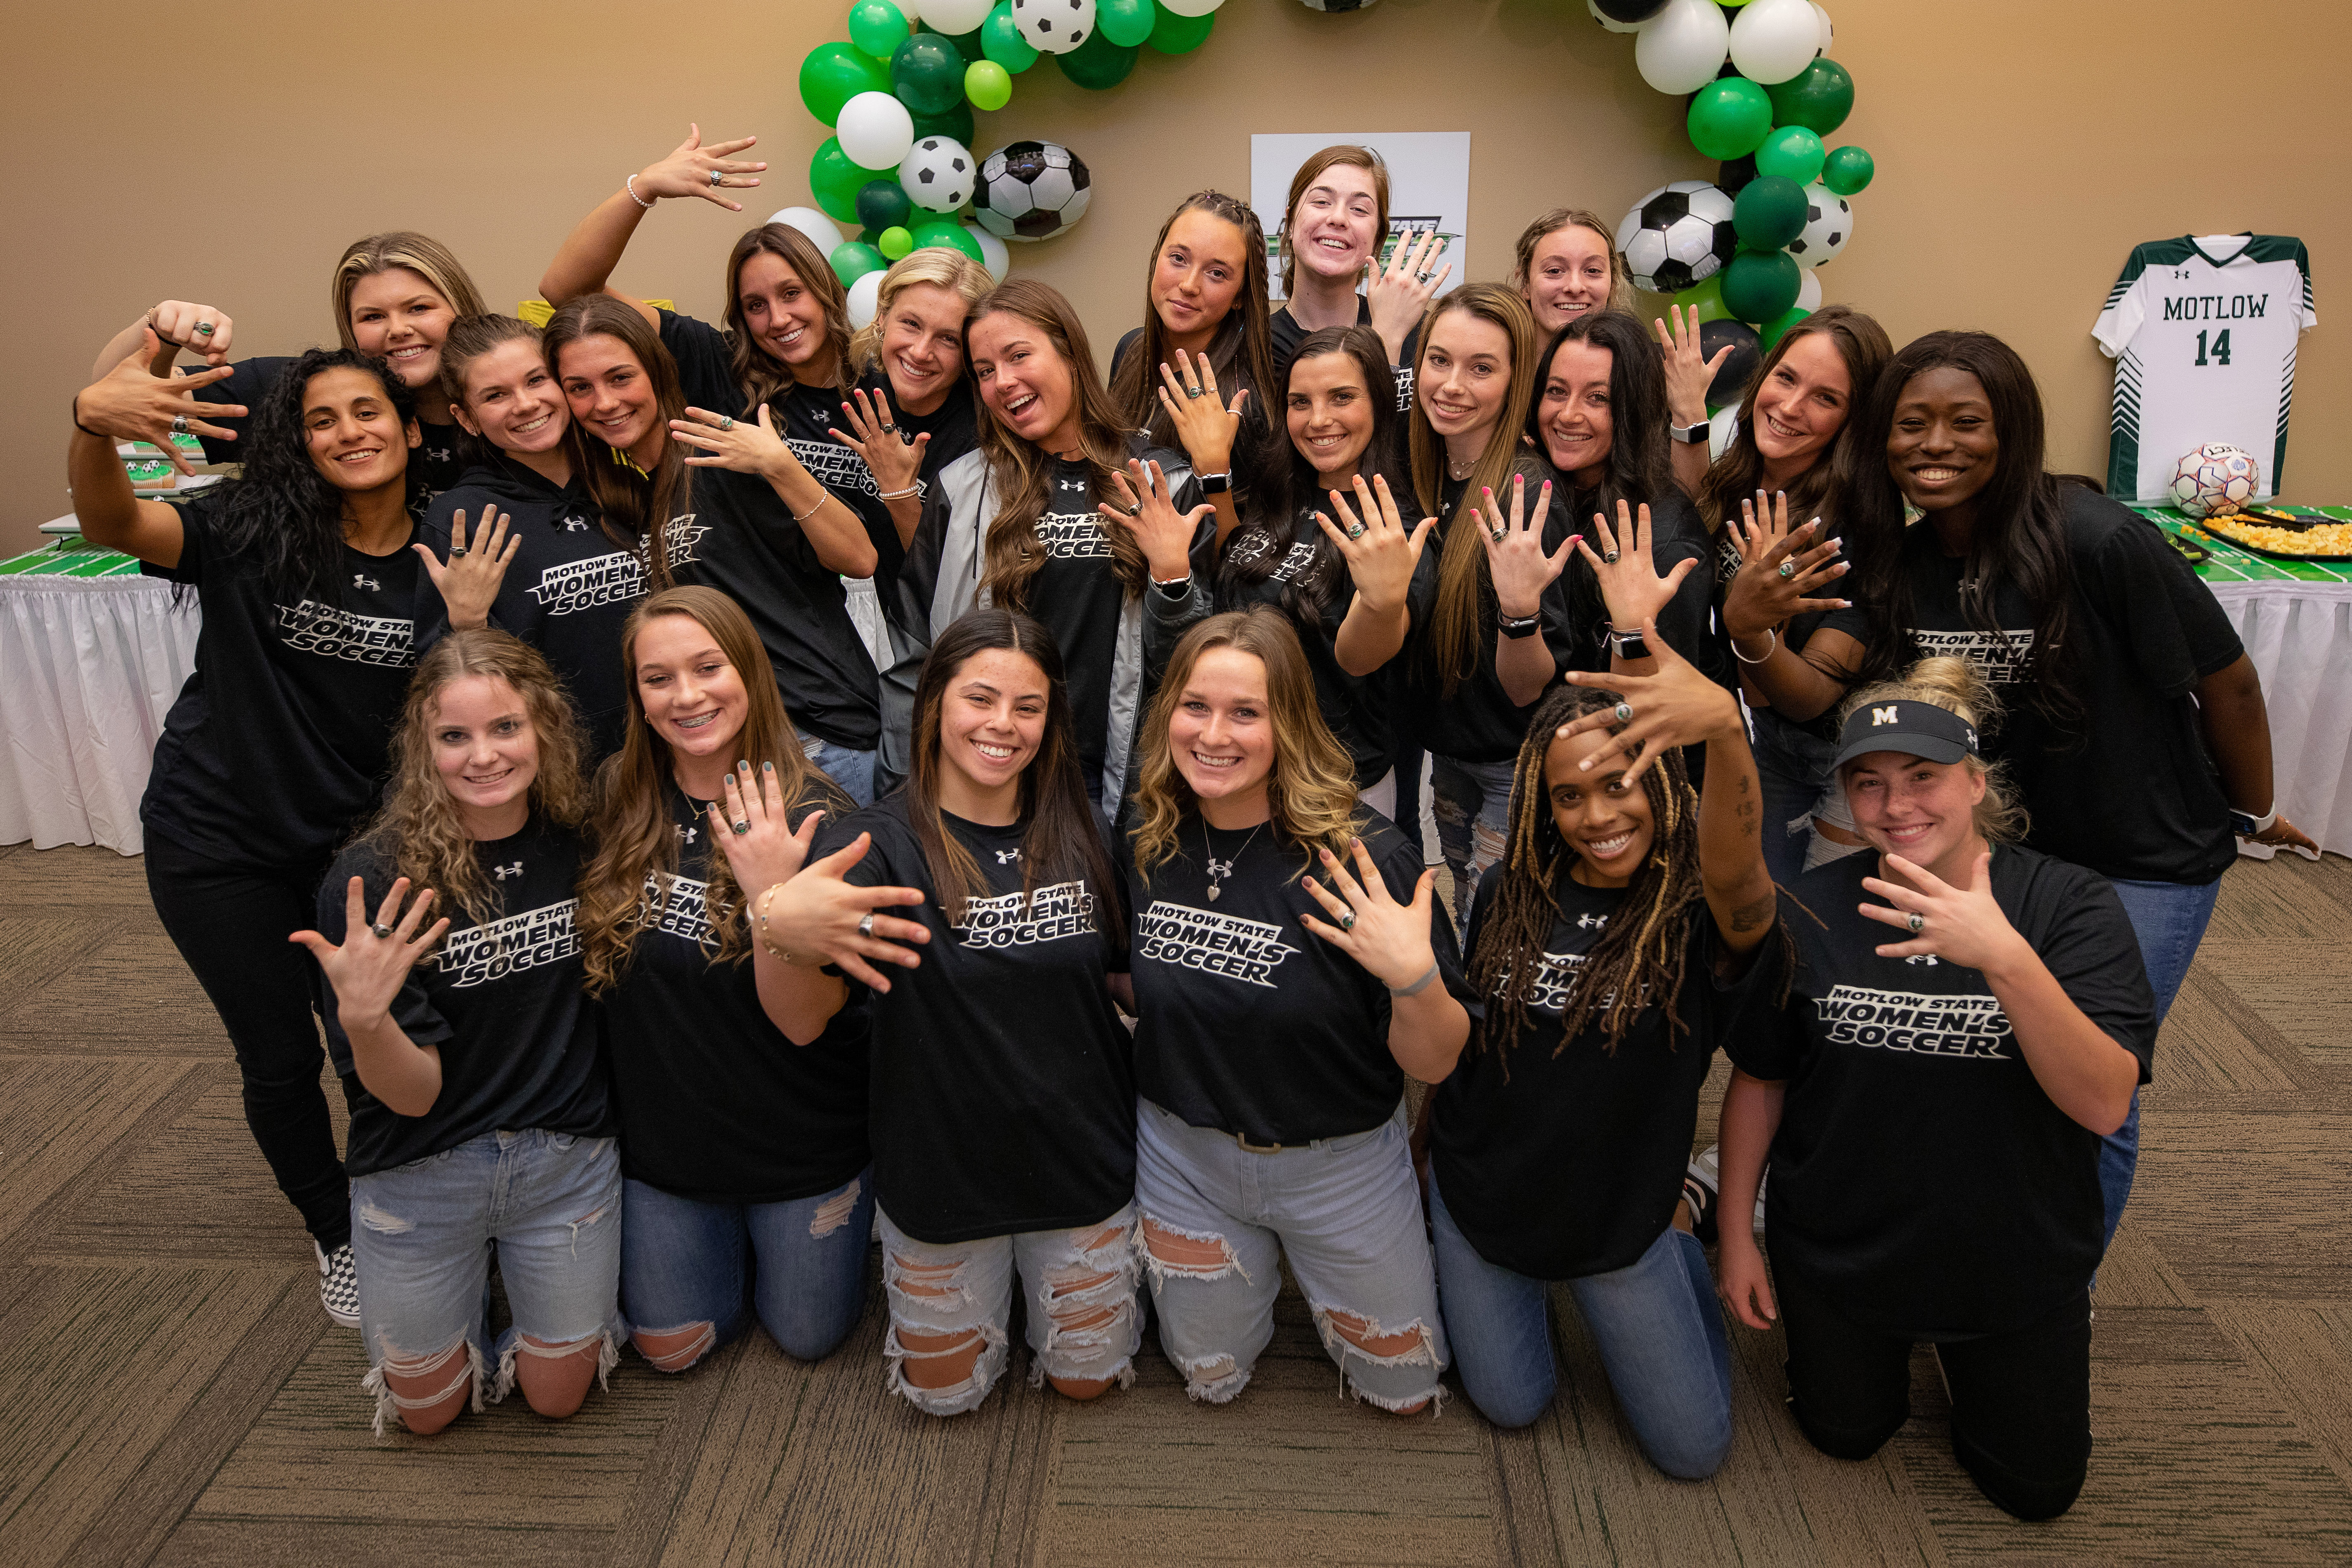 Motlow State women’s soccer team members show off their championship rings during a celebration on the College’s Moore County campus in early March.